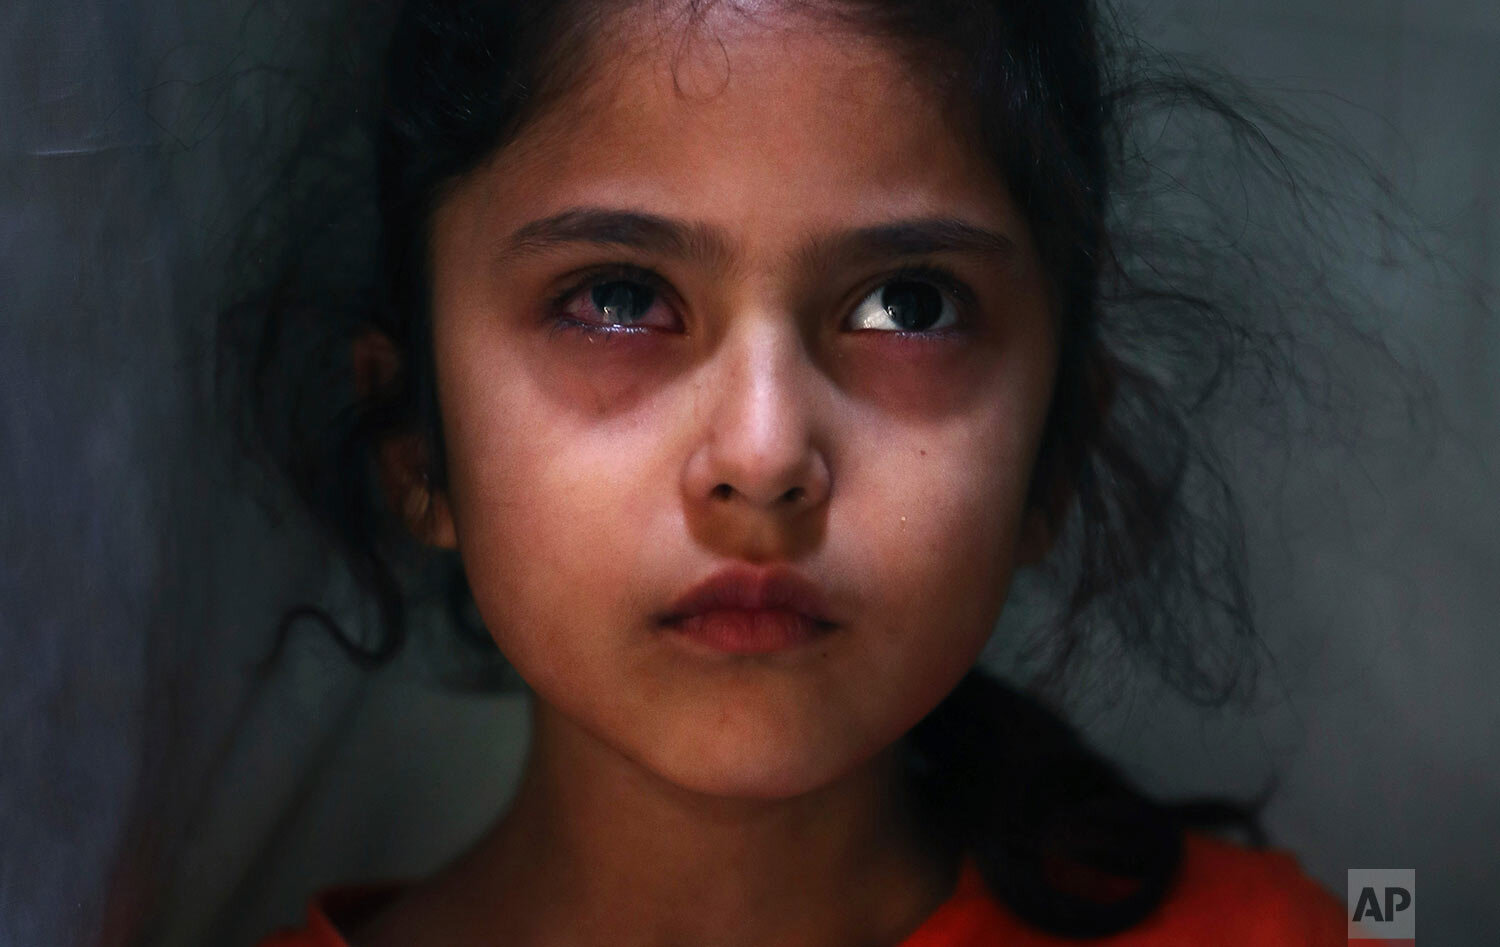  Six-year-old Muneefa Nazir, a Kashmiri girl whose right eye was hit by a marble ball shot allegedly by Indian Paramilitary soldiers on Aug. 12, stands outside her home in Srinagar, Indian controlled Kashmir on Sept. 17, 2019. (AP Photo/Mukhtar Khan)